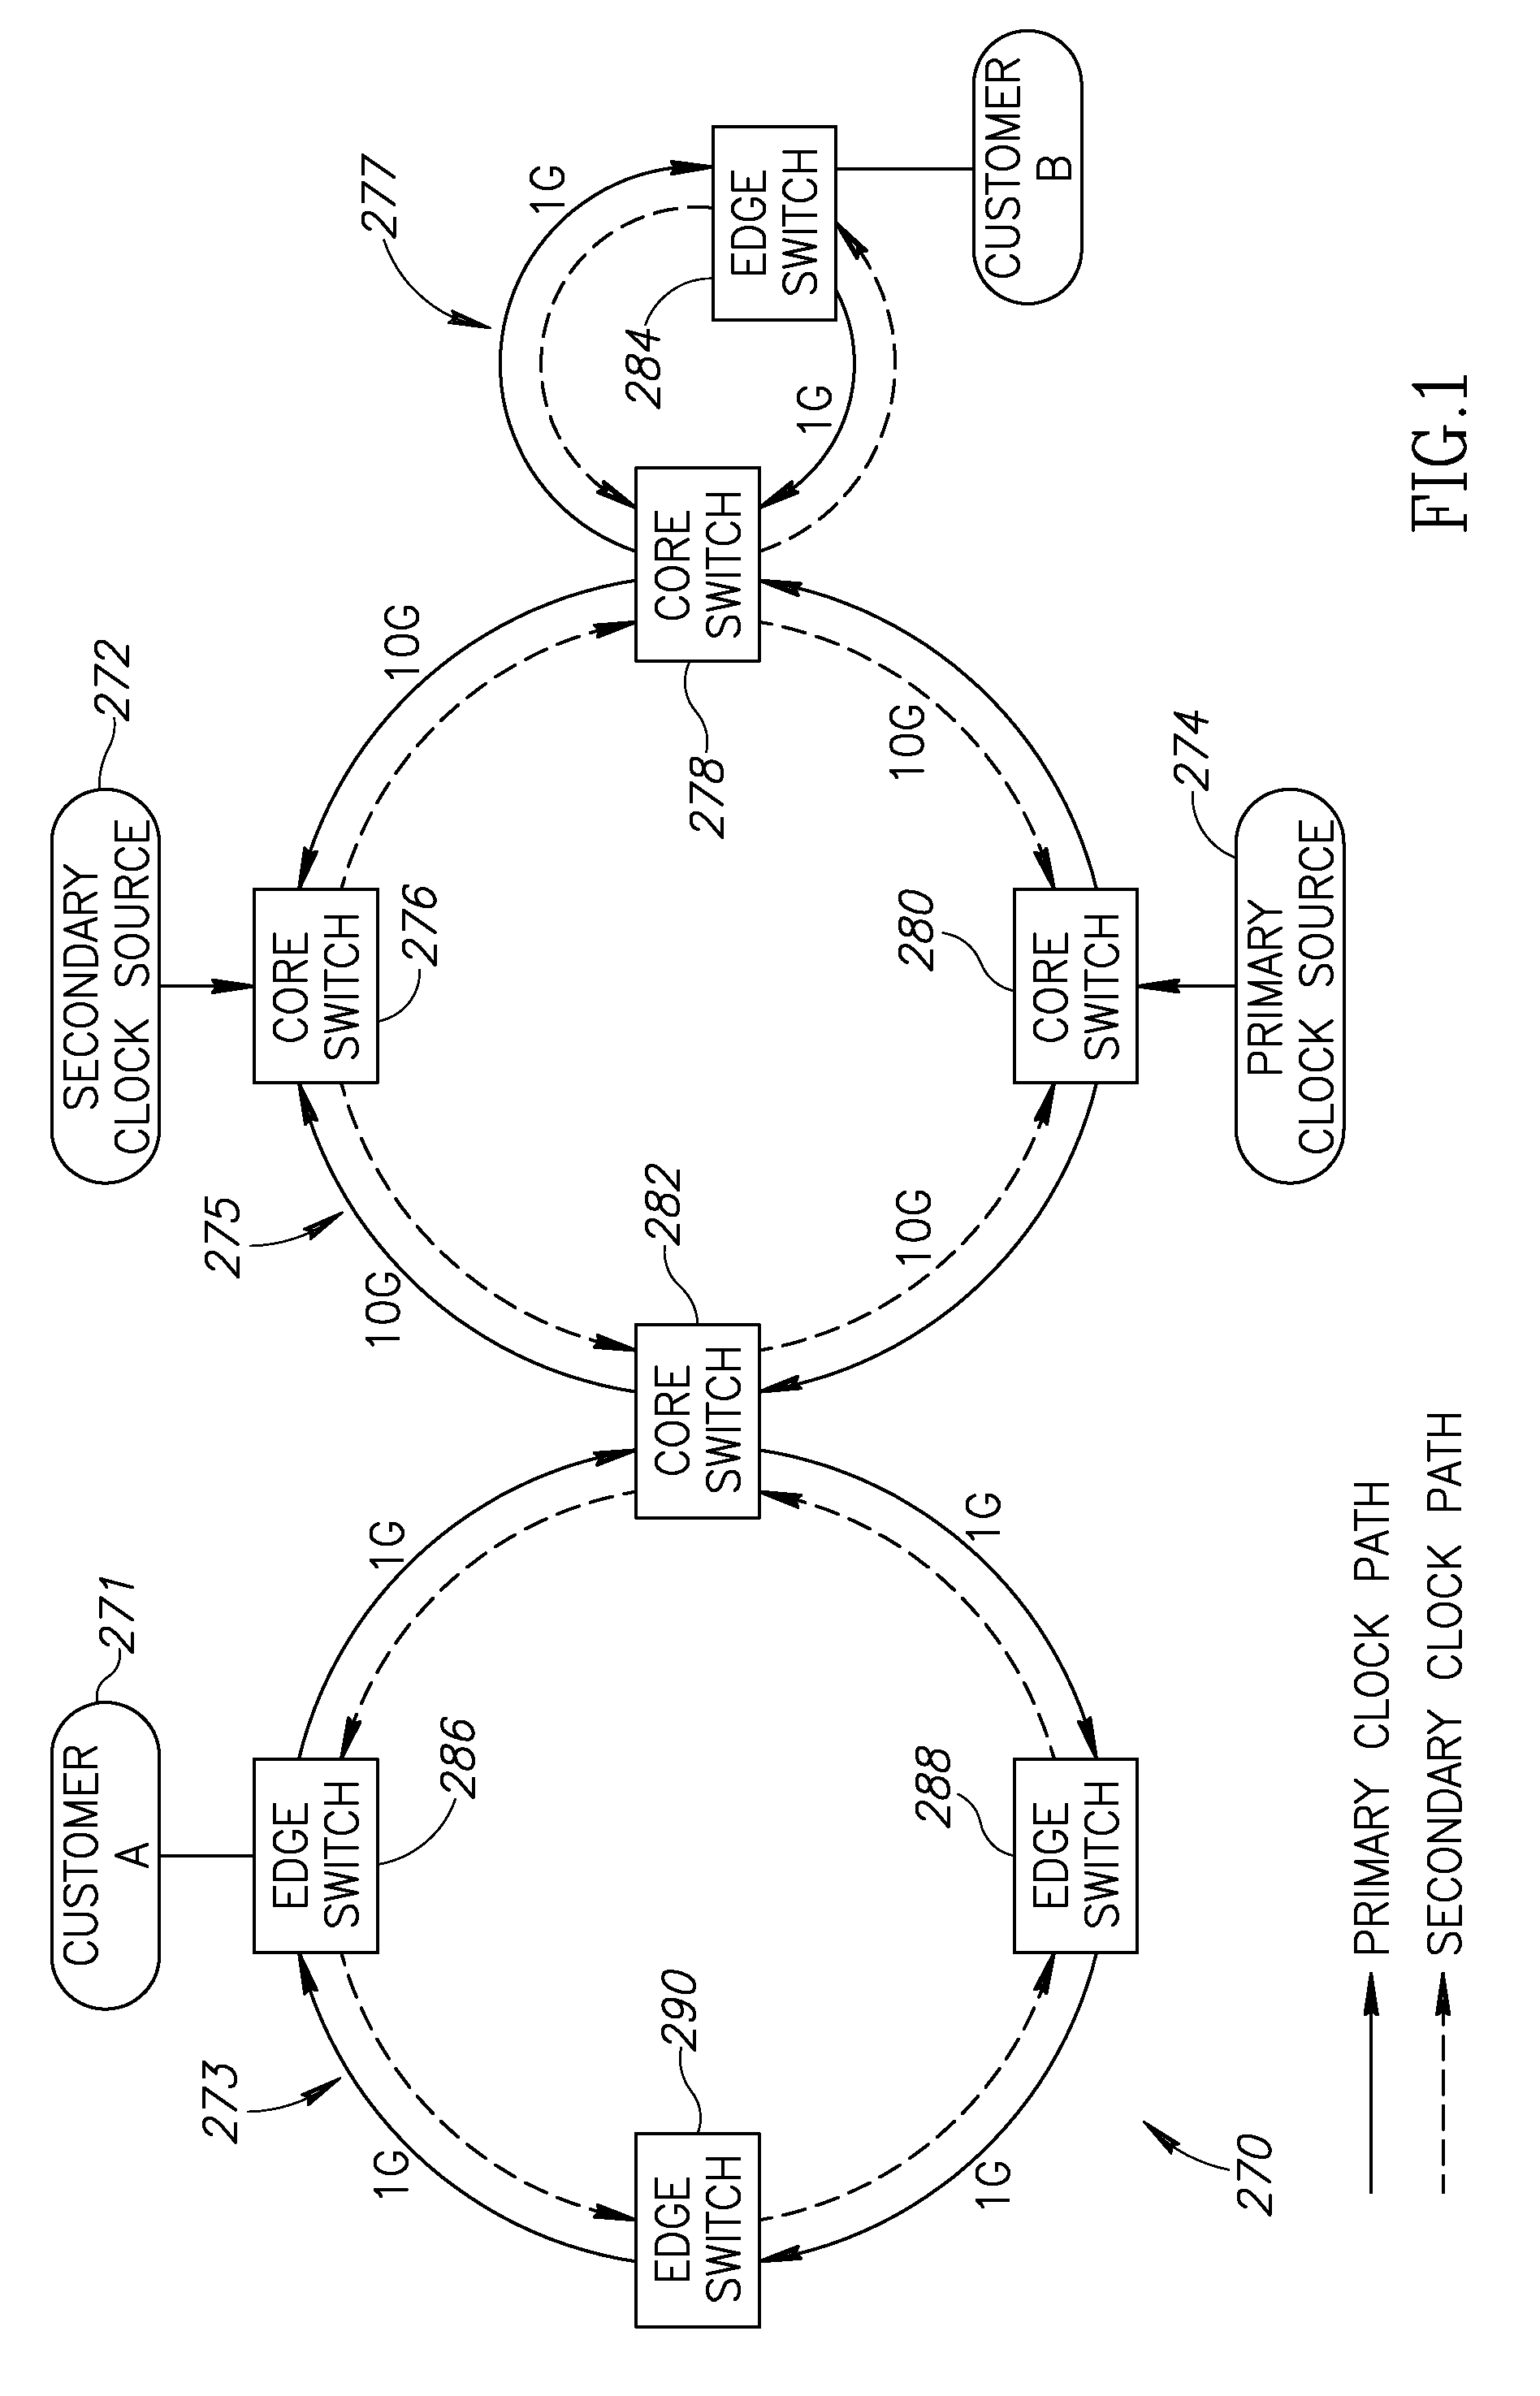 Clock synchronization and distribution over a legacy optical Ethernet network